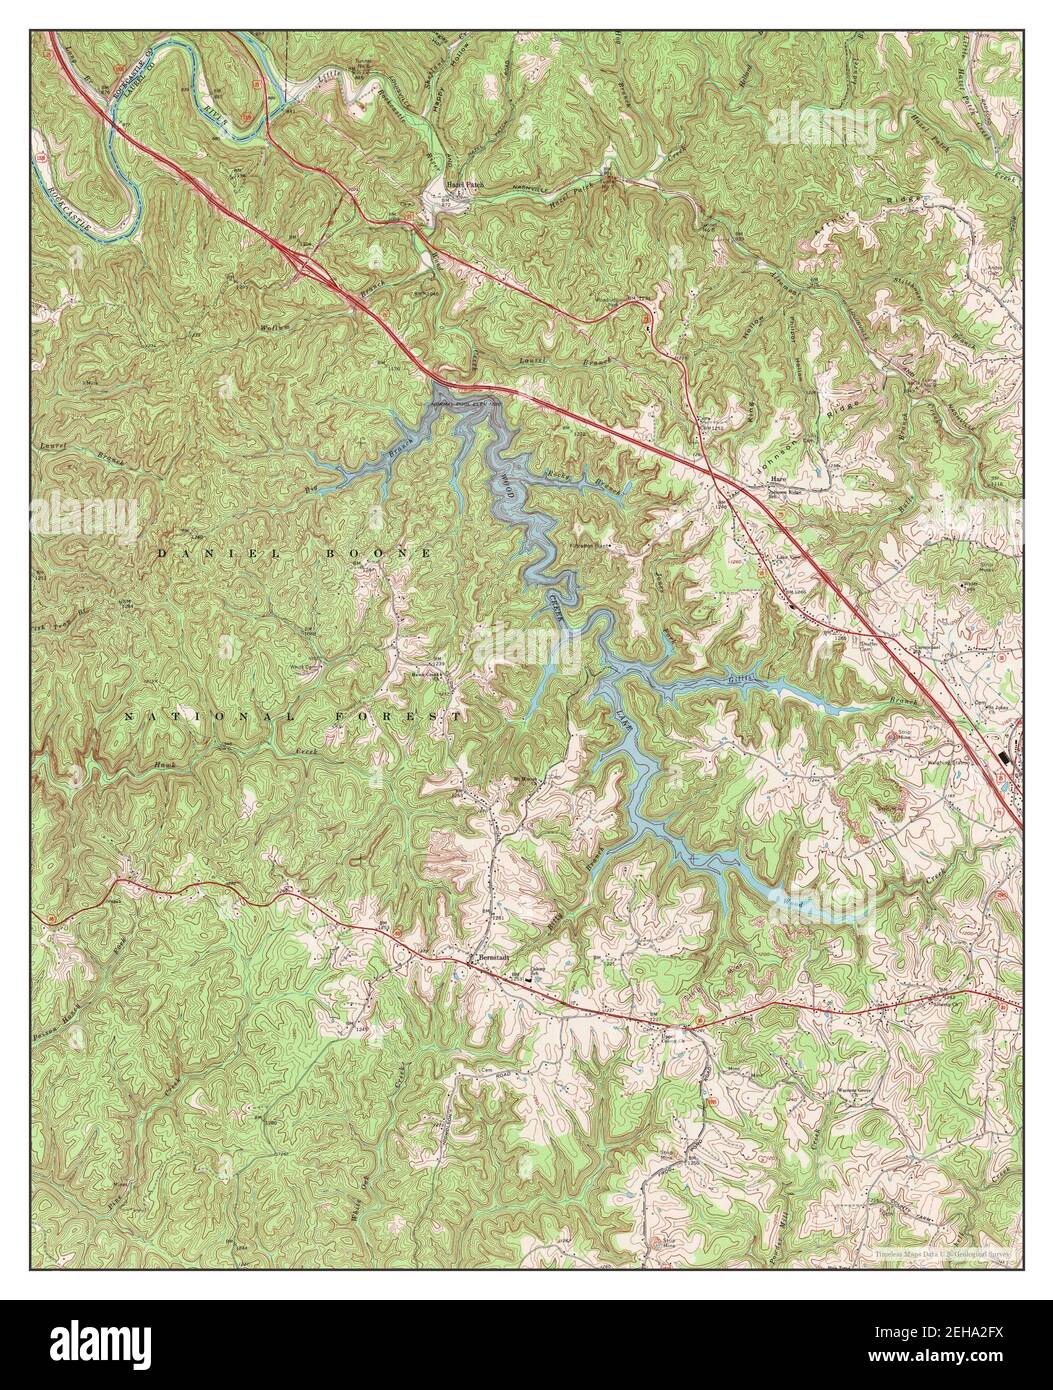 Bernstadt, Kentucky, map 1969, 1:24000, United States of America by Timeless Maps, data U.S. Geological Survey Stock Photo